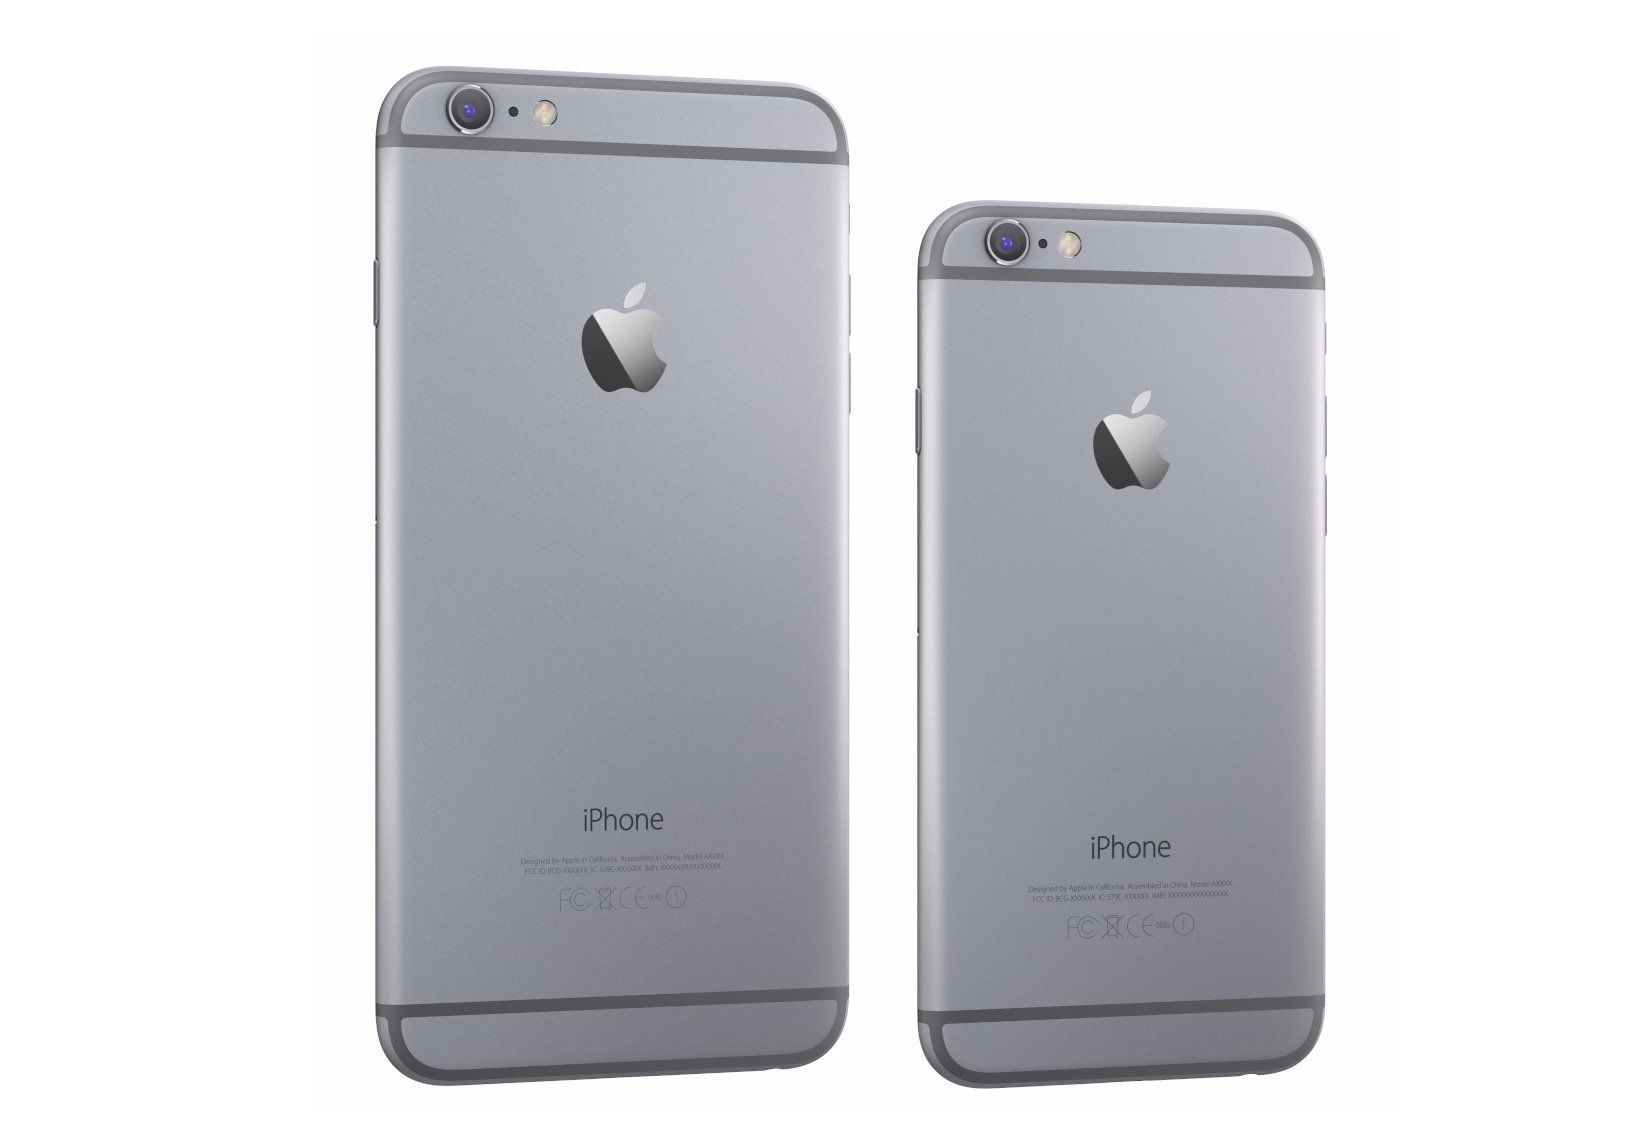 What iPhone 6 Color Gold, Silver or